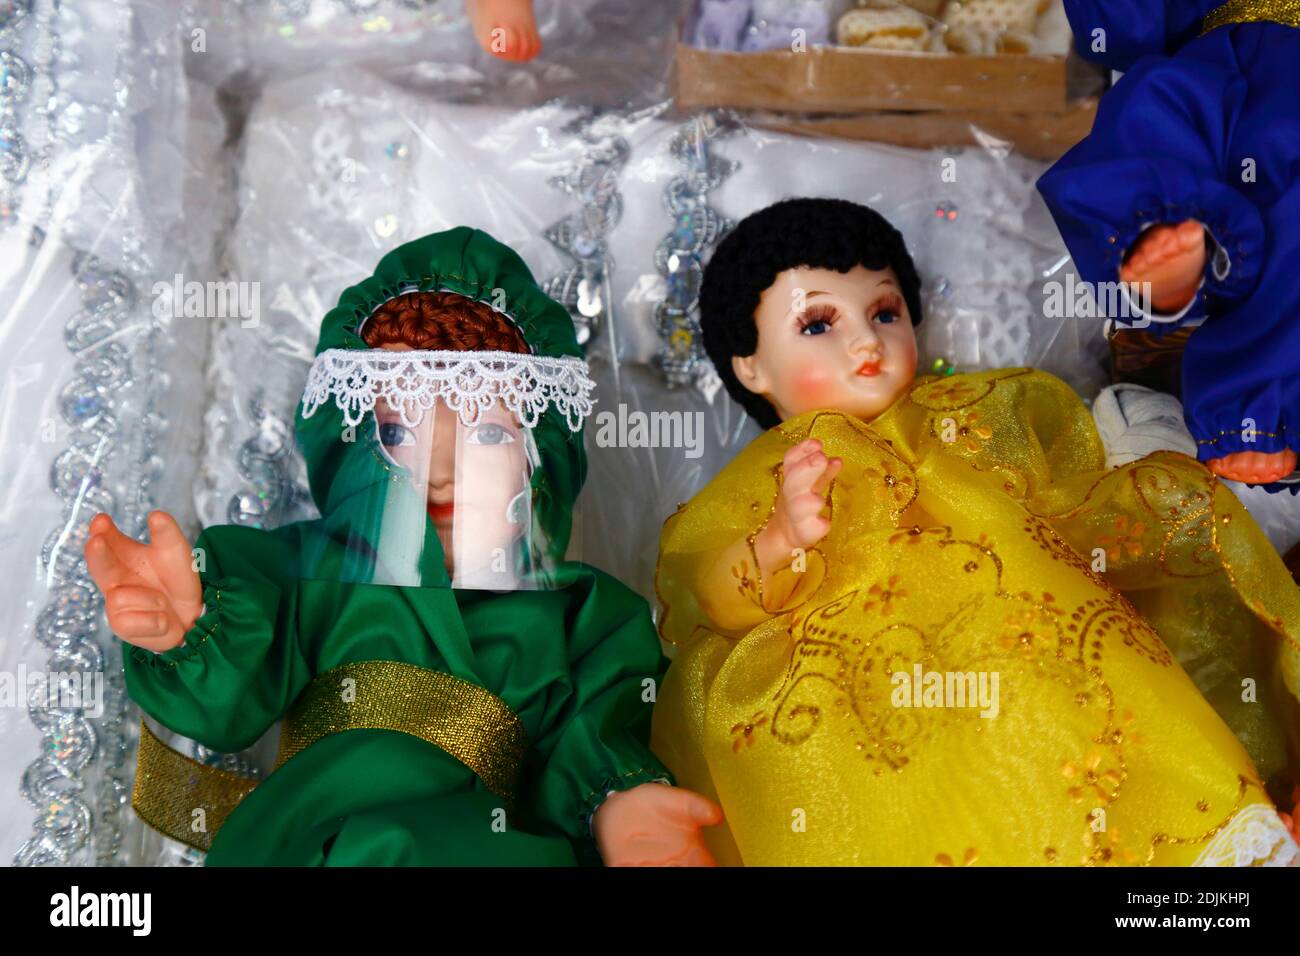 14th December 2020, LA PAZ, BOLIVIA: Baby Jesus figure (called Niño in Spanish) for nativity scenes wearing face mask and protective clothing against the covid 19 coronavirus on sale in a Christmas market. Nativity scenes are an important Christmas decoration in houses and public places in Latin America, and also Spain (where the tradition comes from).  Large numbers of figurines for nativity scenes are sold in Christmas markets; niños wearing protection against the covid 19 coronavirus are a new option this year alongside traditionally dressed niños as a result of the pandemic. Stock Photo